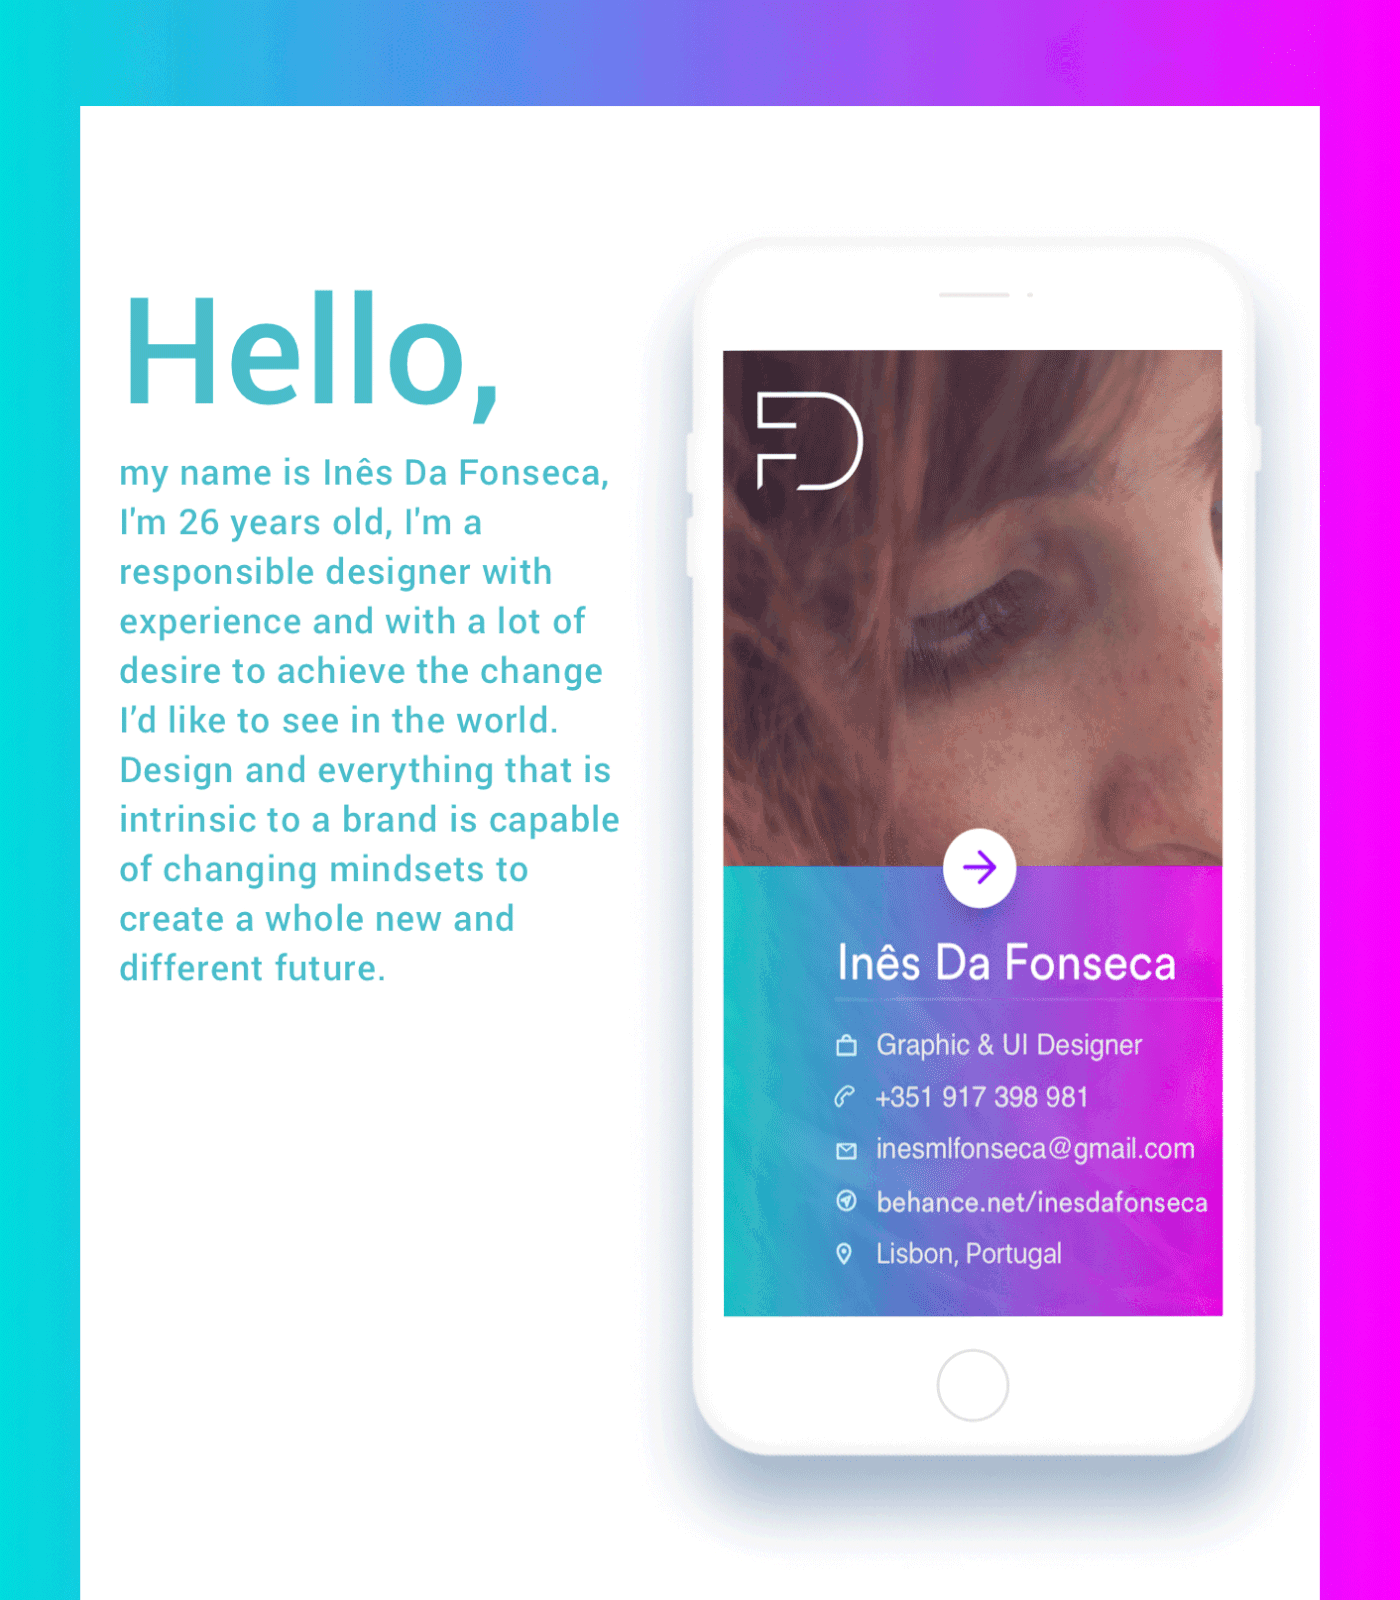 Personal Brand app color design ux/ui user interface user experience Webdesign